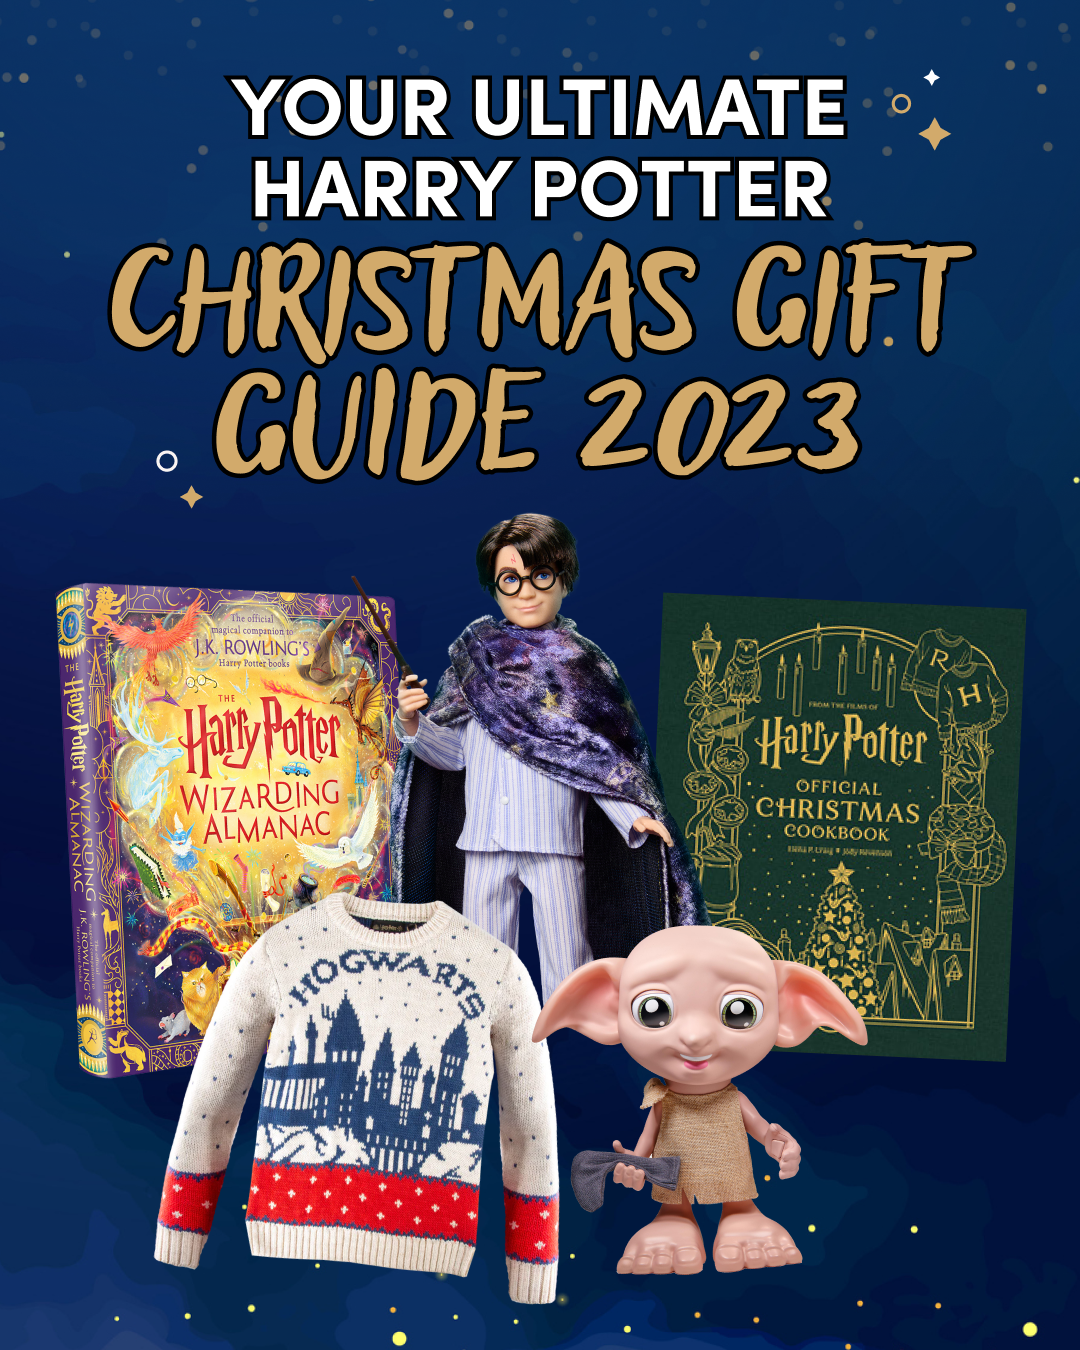 The Ultimate Gift Guide for Harry Potter Fans • The Blonde Abroad